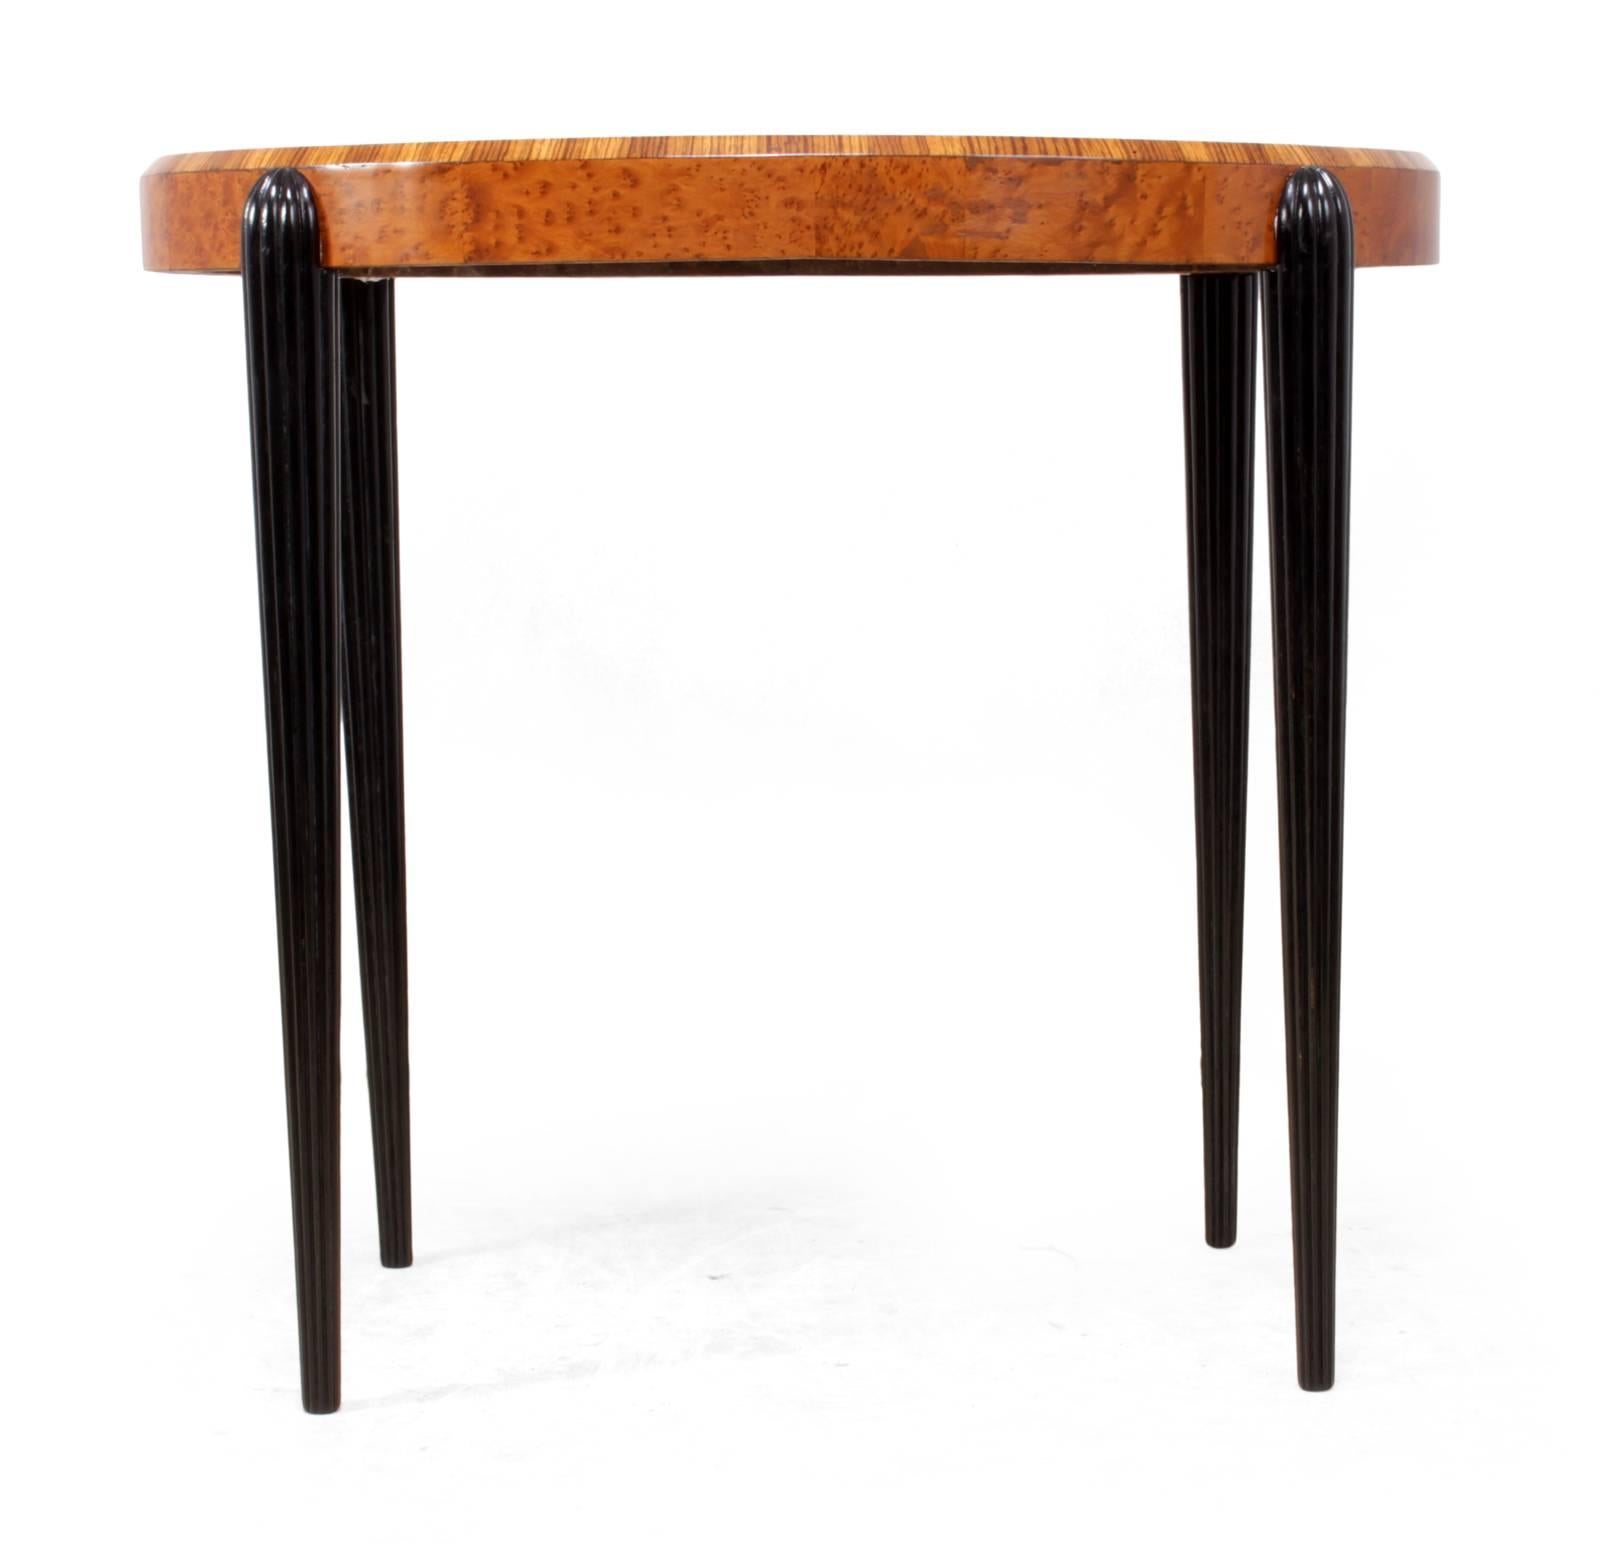 Art Deco side table in the style of Rhulman
A very good Art Deco side table produced in the style of Rhulman with fluted legs and bird’s-eye maple and zebrano oval shaped top this table has been fully restored and hand polished

Age: